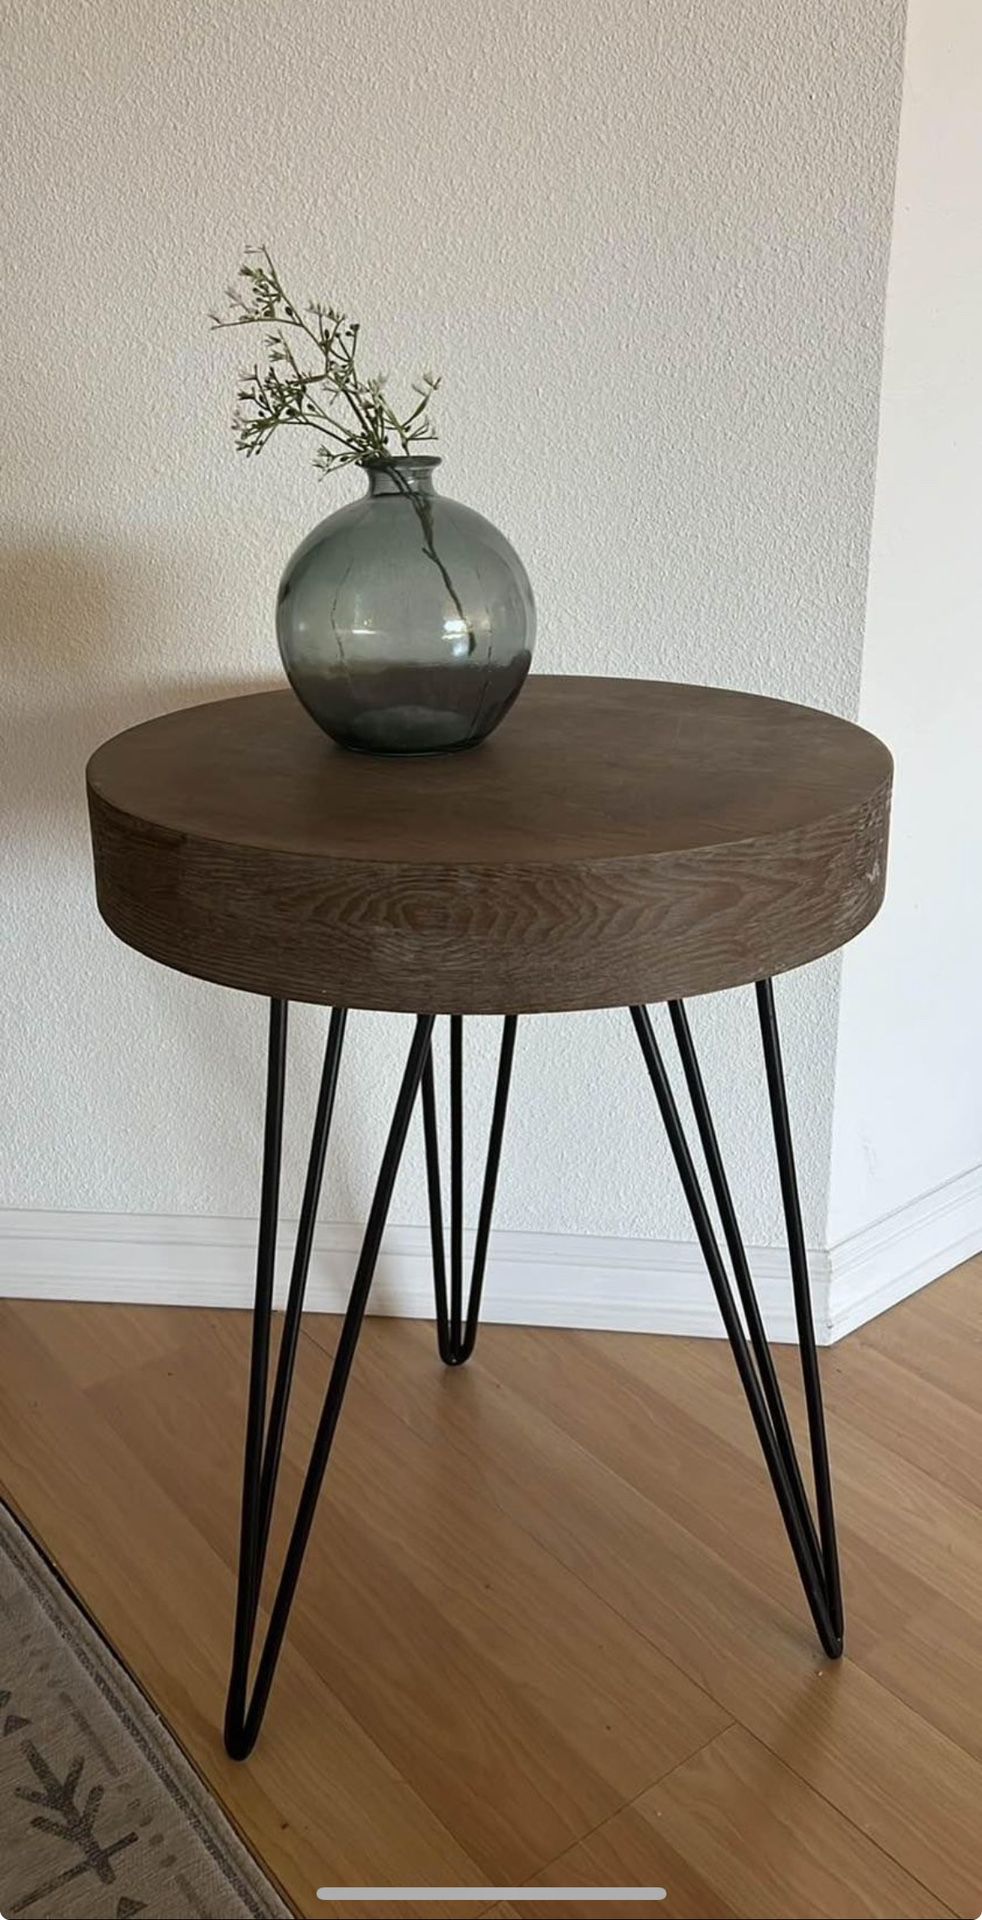 End table 